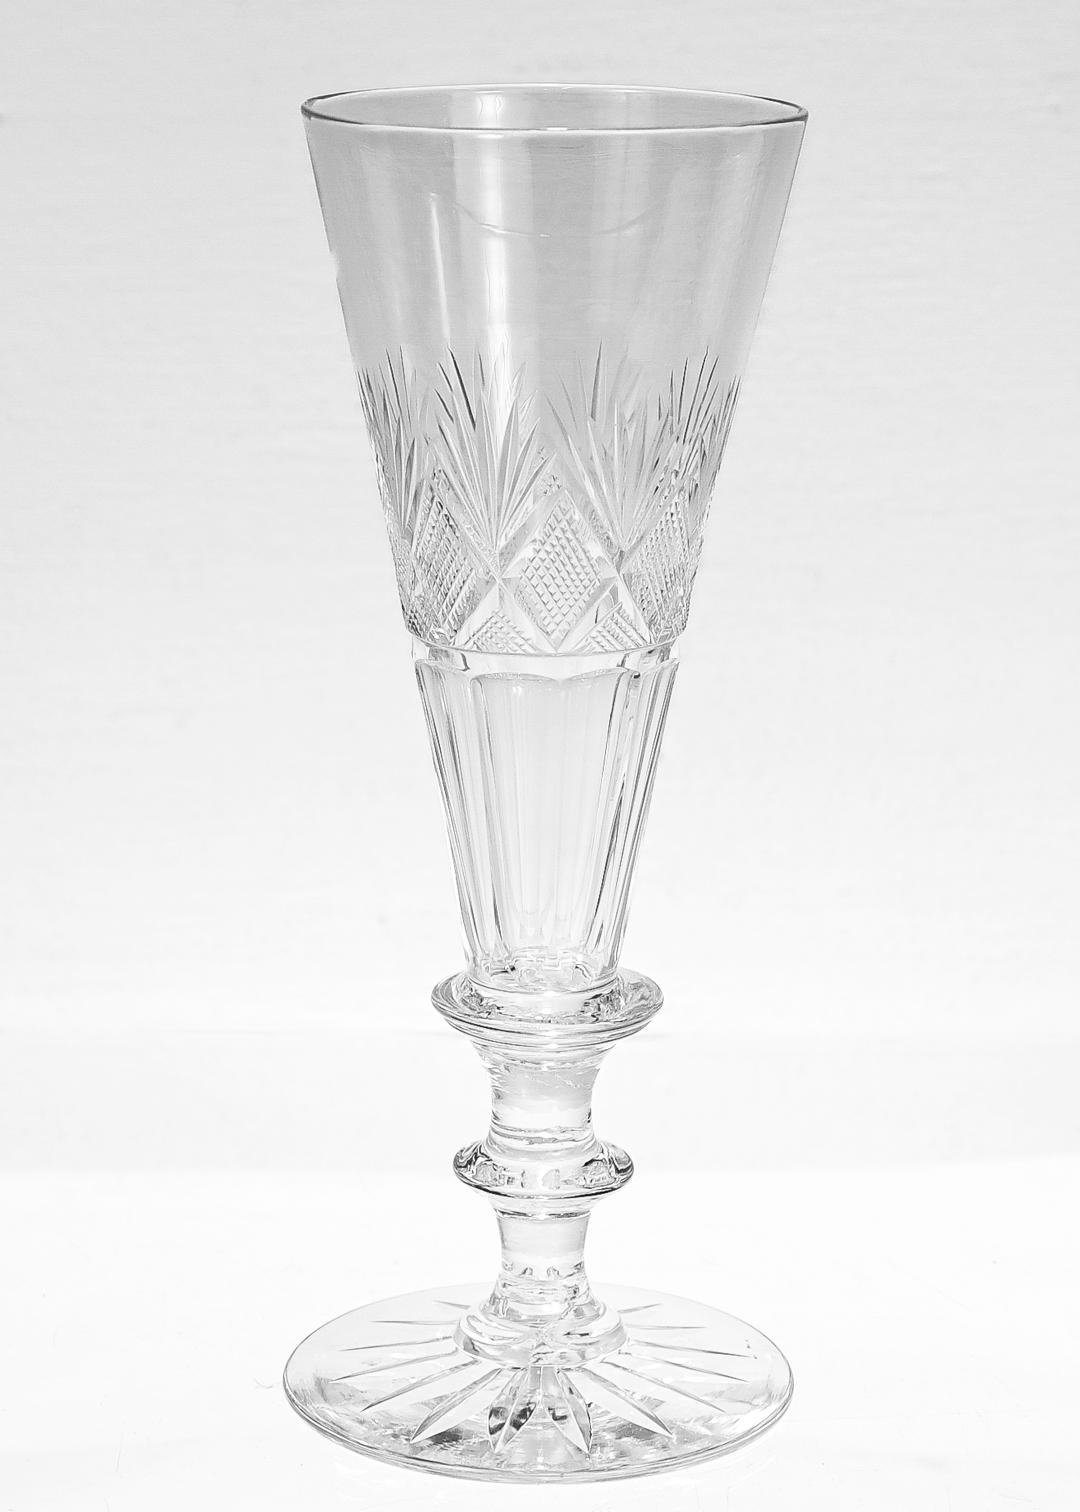 A fine set of 6 antique cut glass champagne flutes.

Each having starcut bases supporting knop stems and fluted strawberry and fan cut tops.

Attributed to Bakewell, Page, & Bakewell of Pittsburgh, PA. 

For related examples see George & Helen